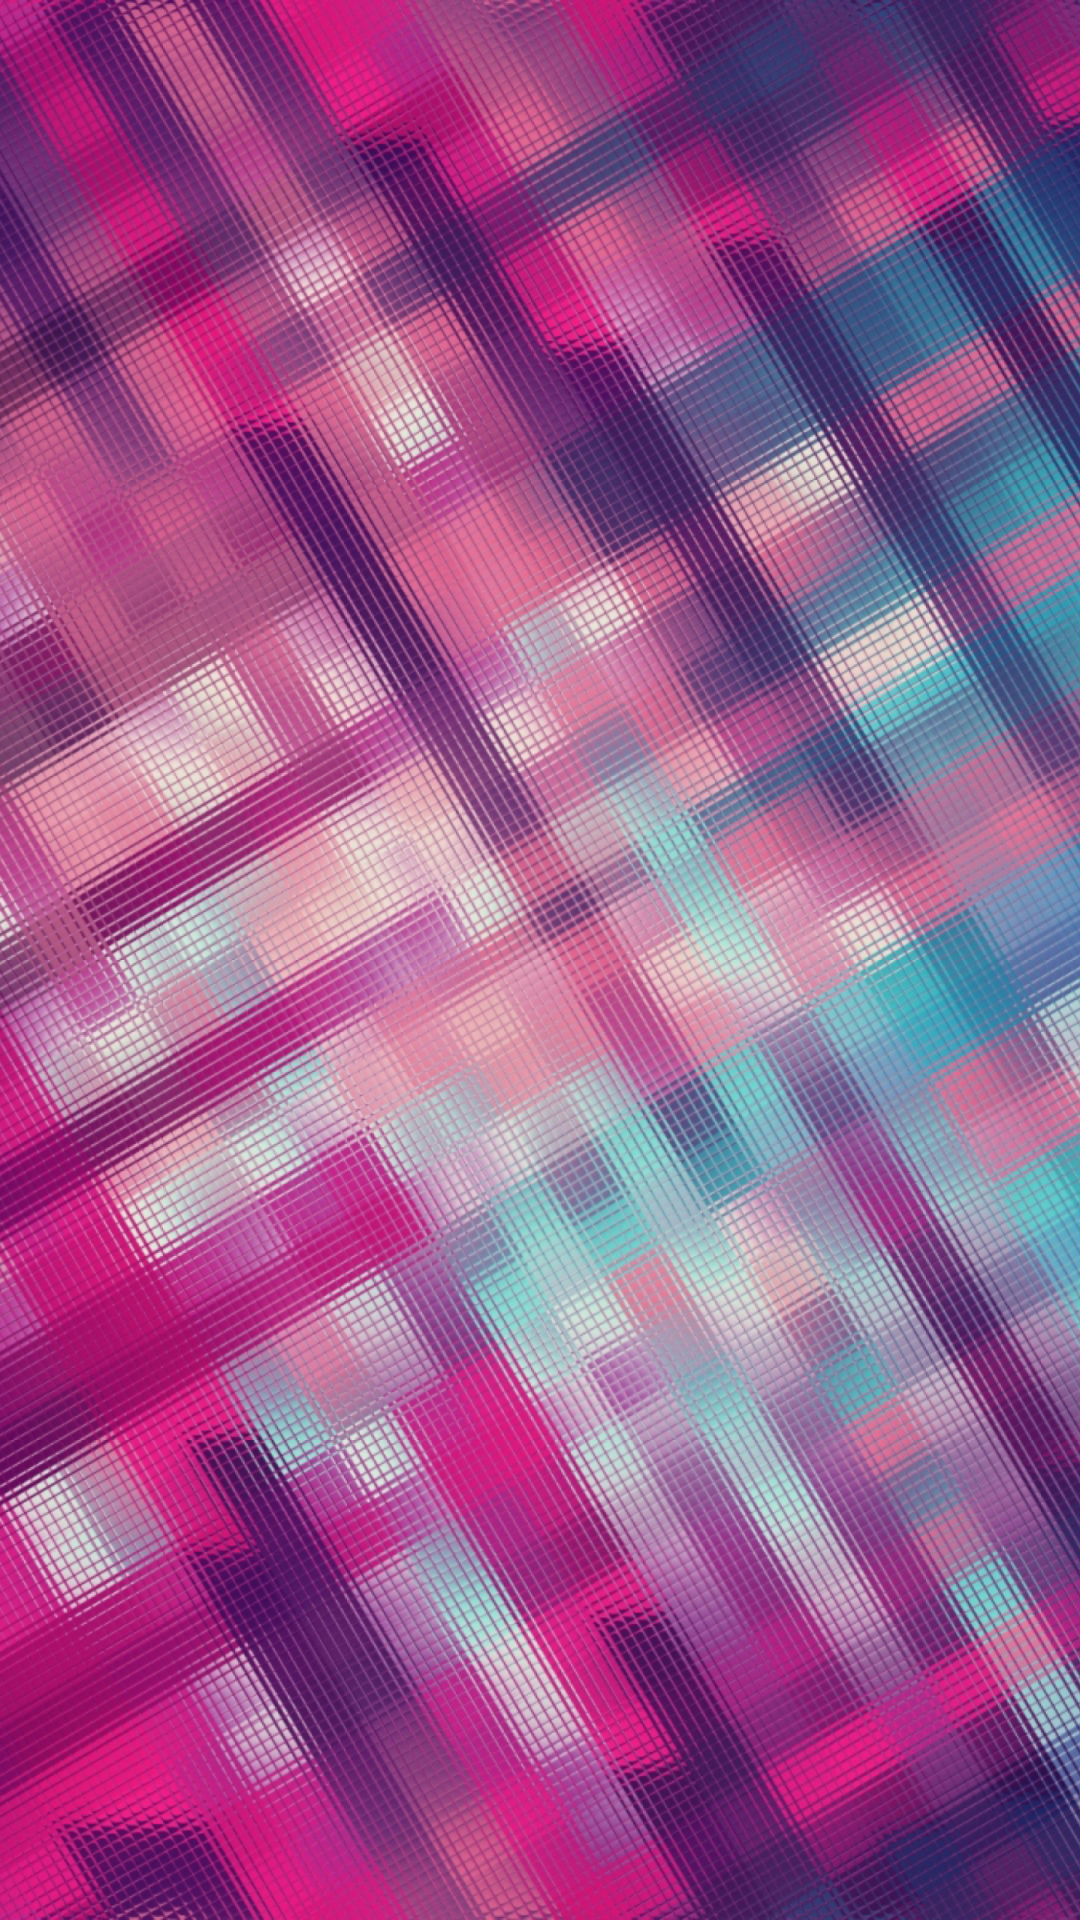 Das Pink And Blue Abstraction Wallpaper 1080x1920